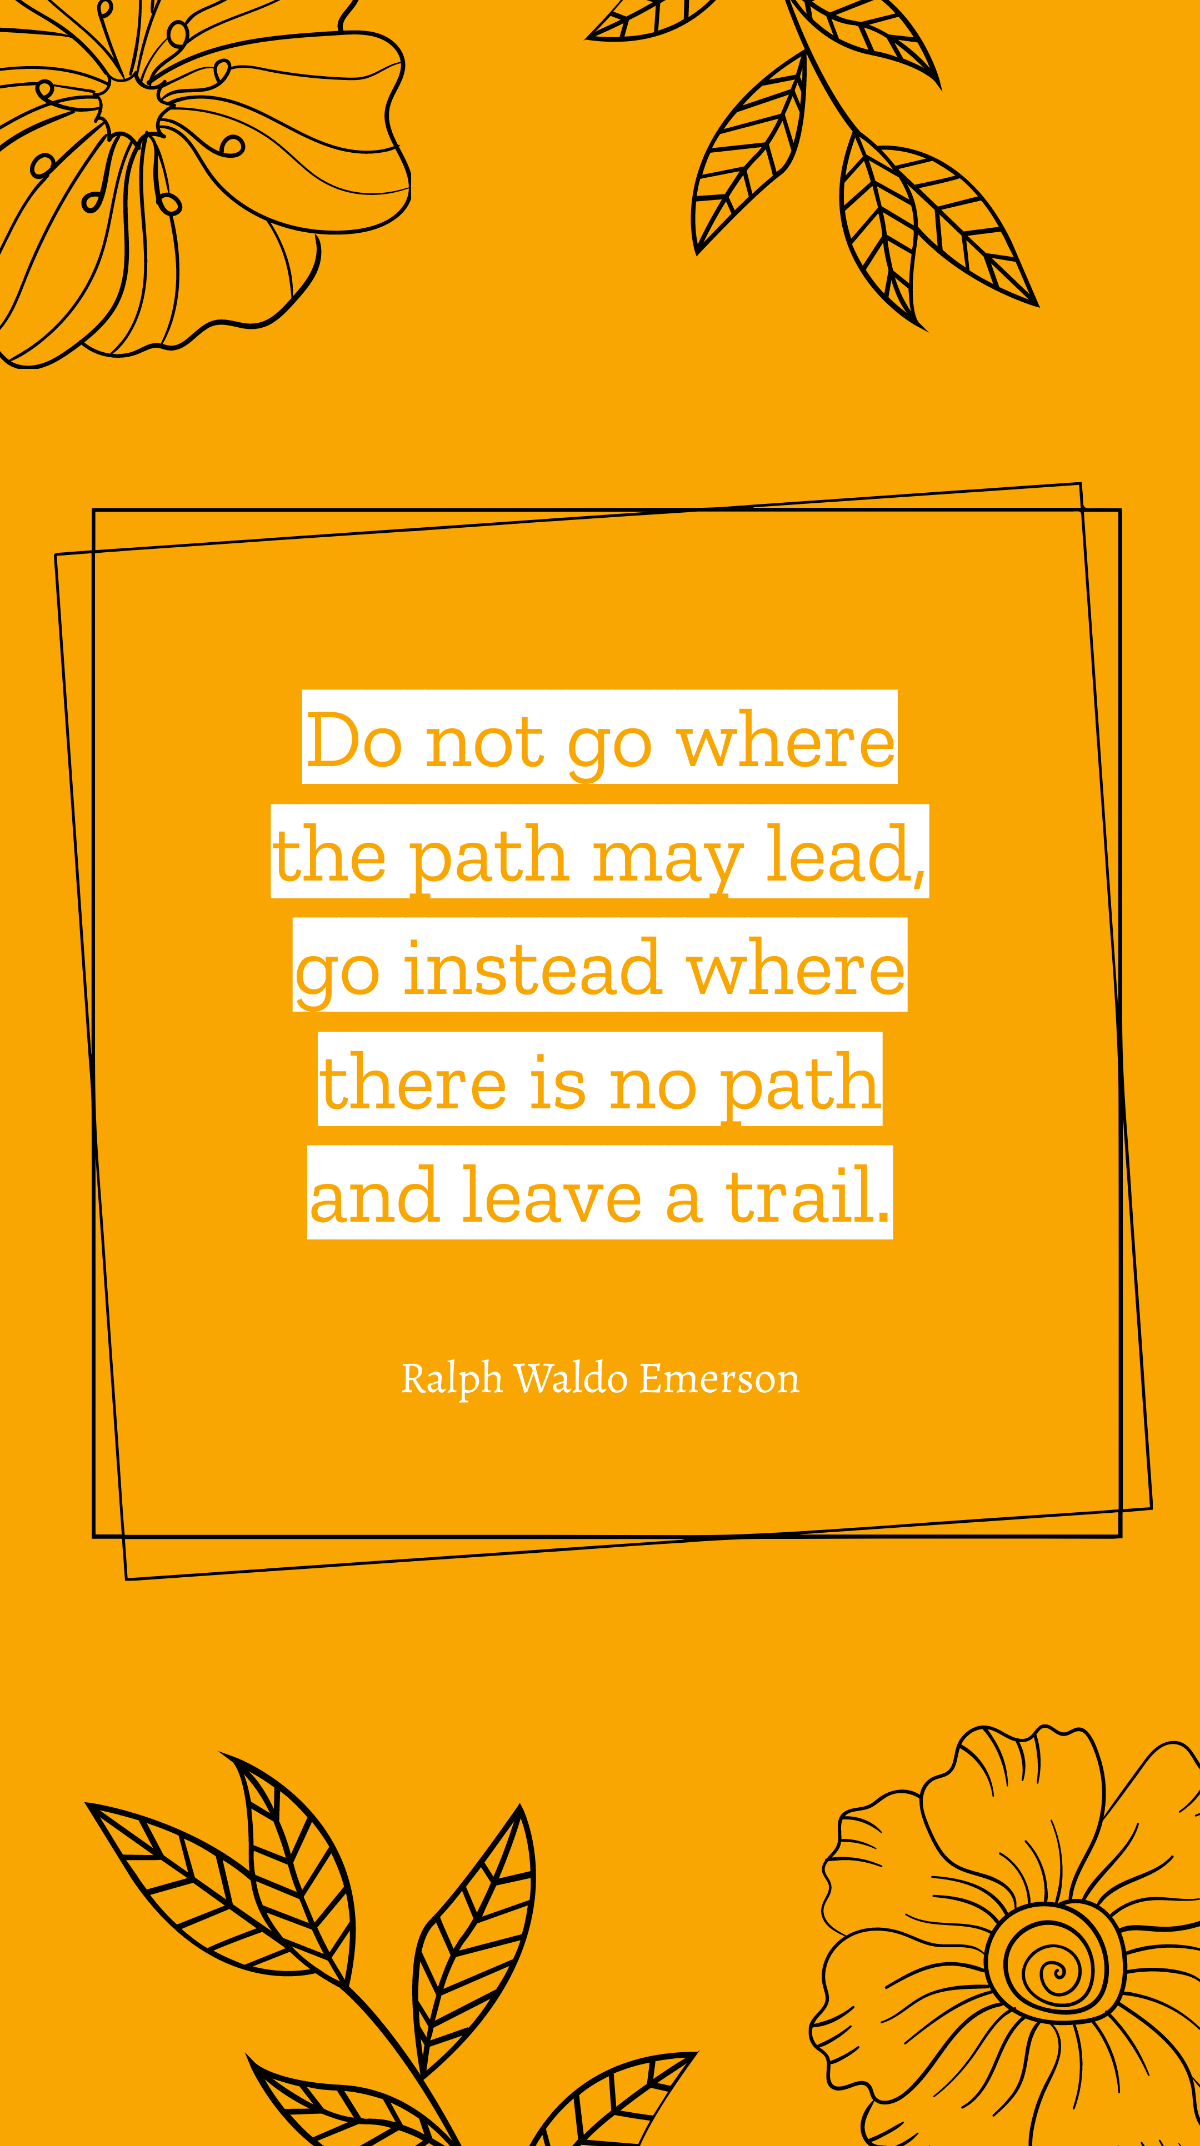 Ralph Waldo Emerson - Do not go where the path may lead, go instead where there is no path and leave a trail Template